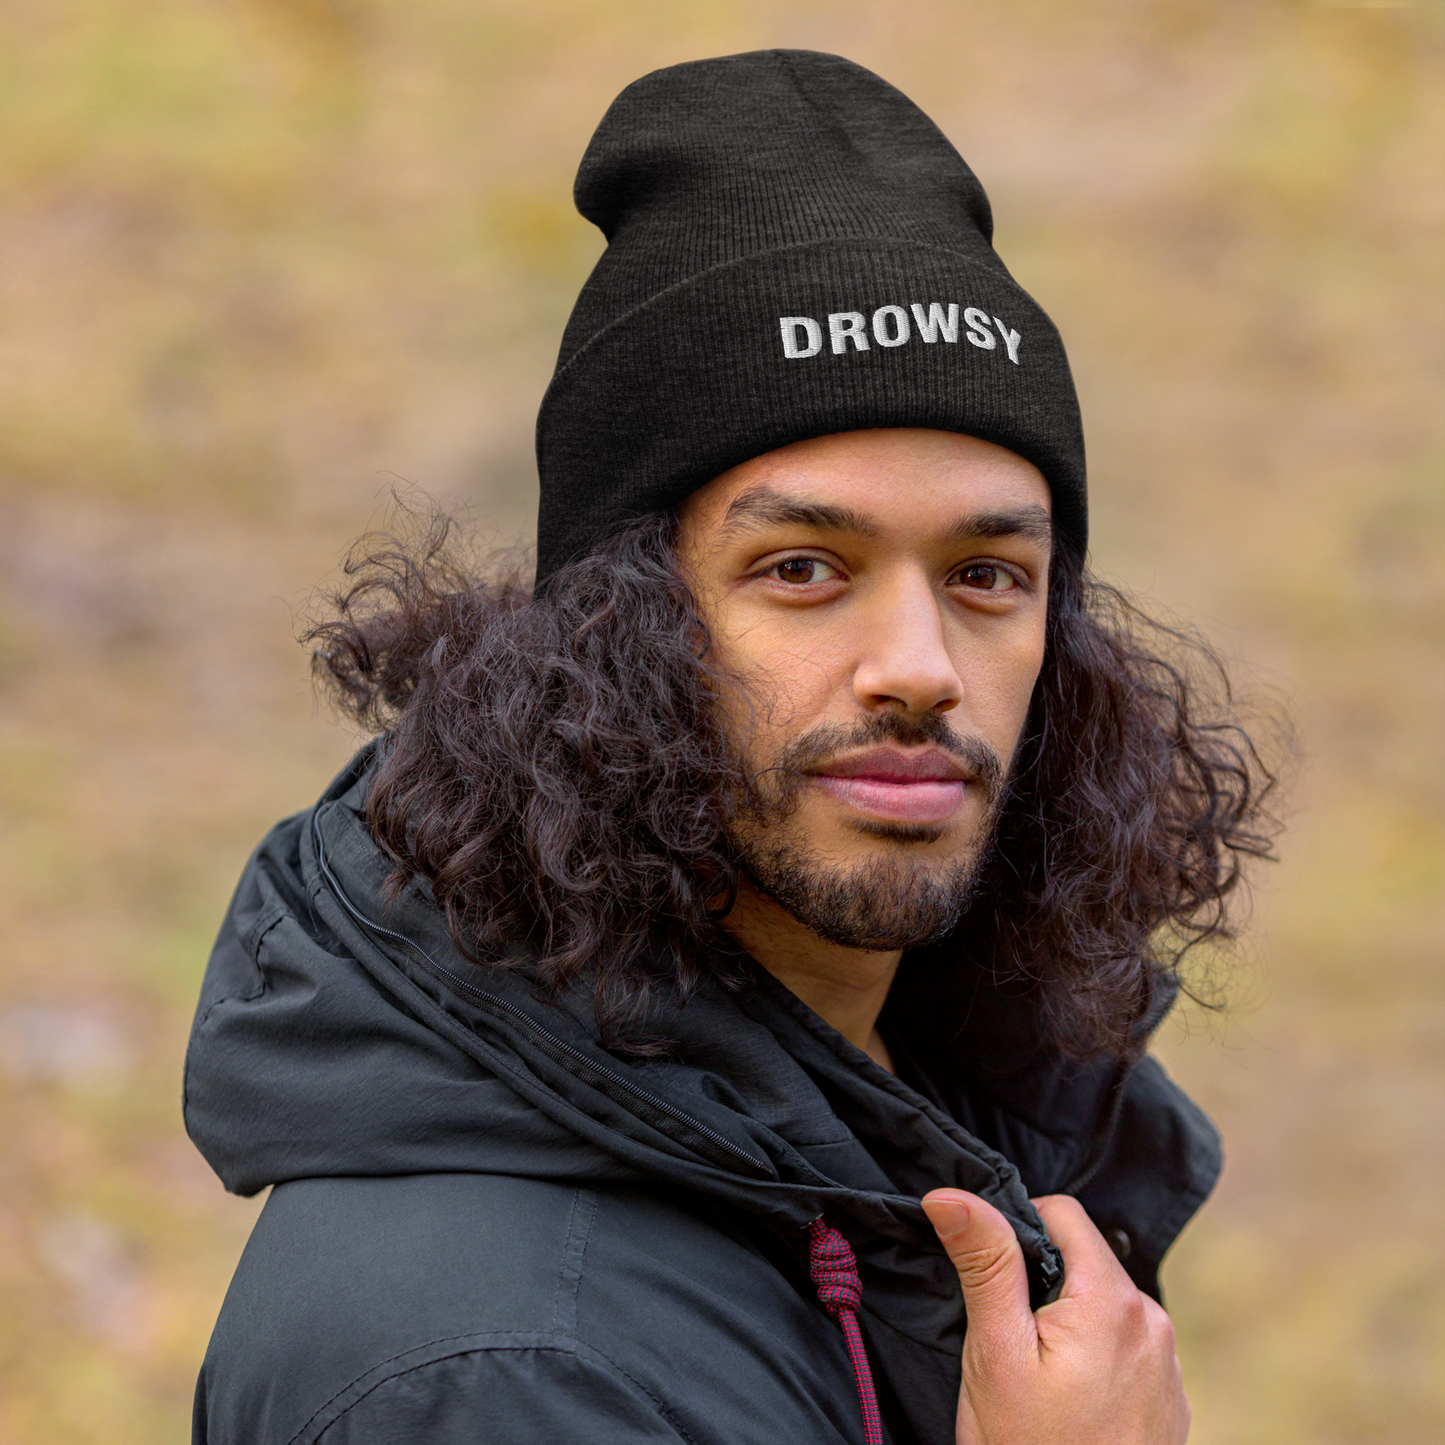 Embroidered Drowsy Beanie